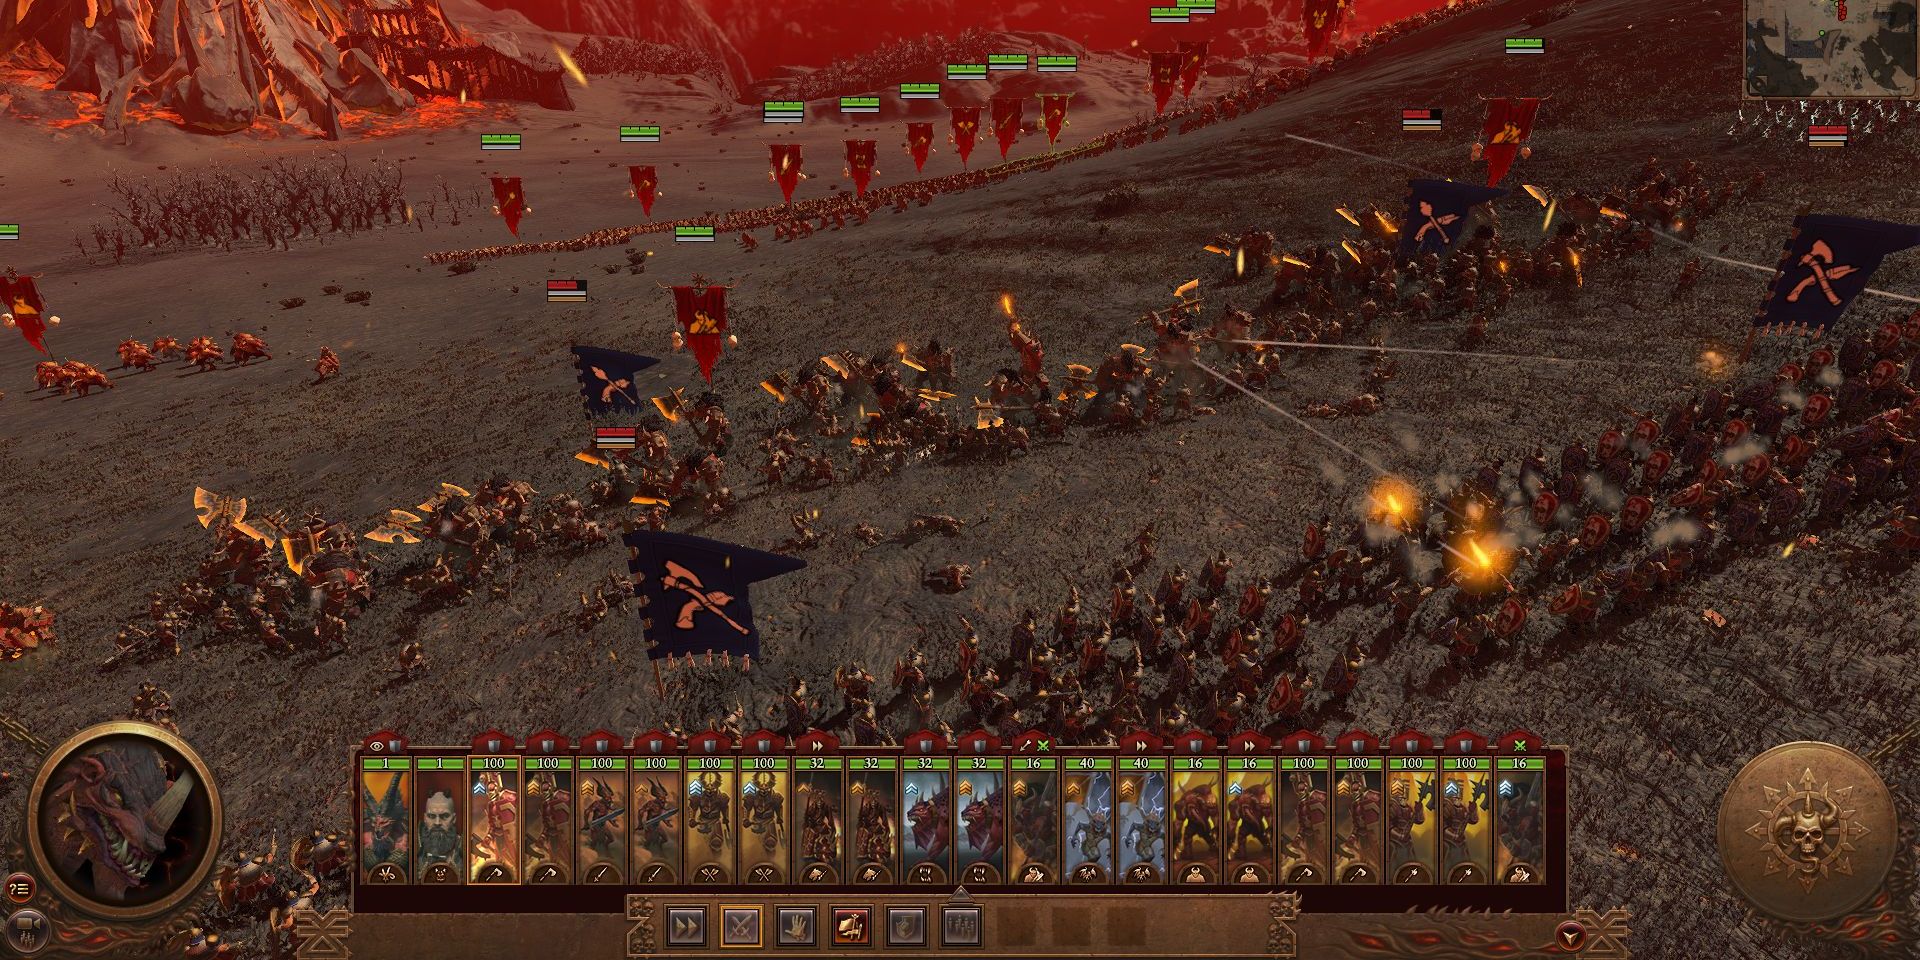 A battle in the realm of Khorne.